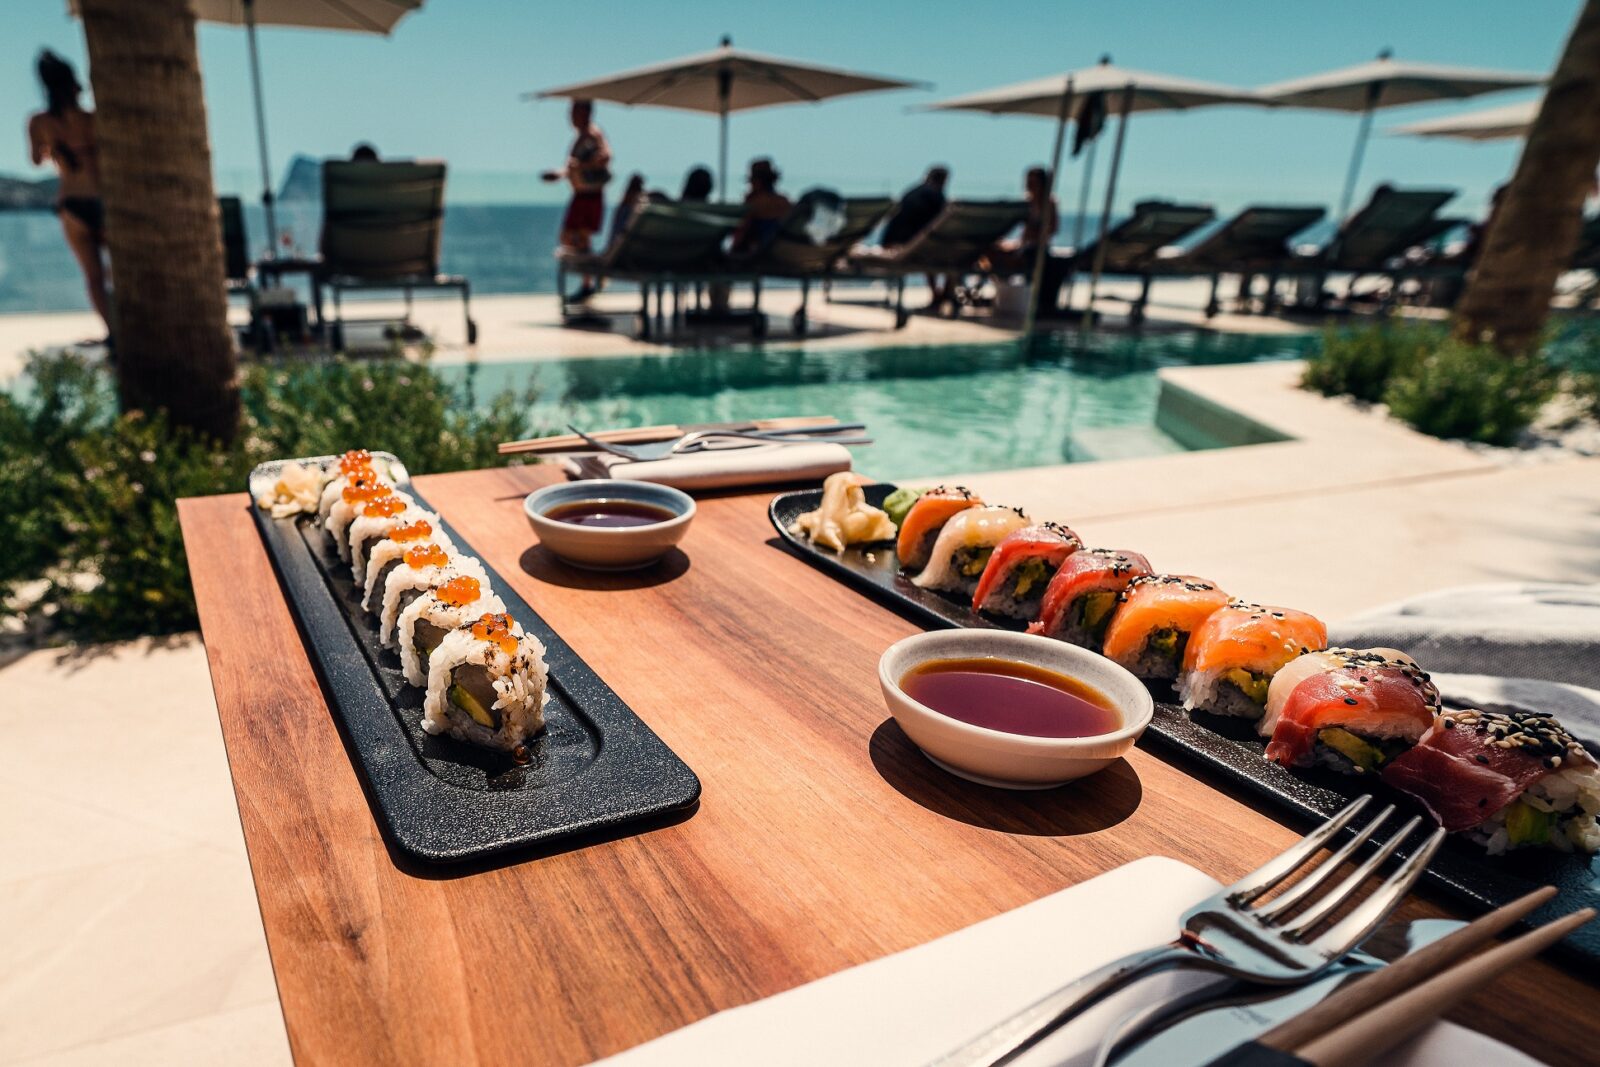 seafood and sushi at an outdoor resort in ibiza